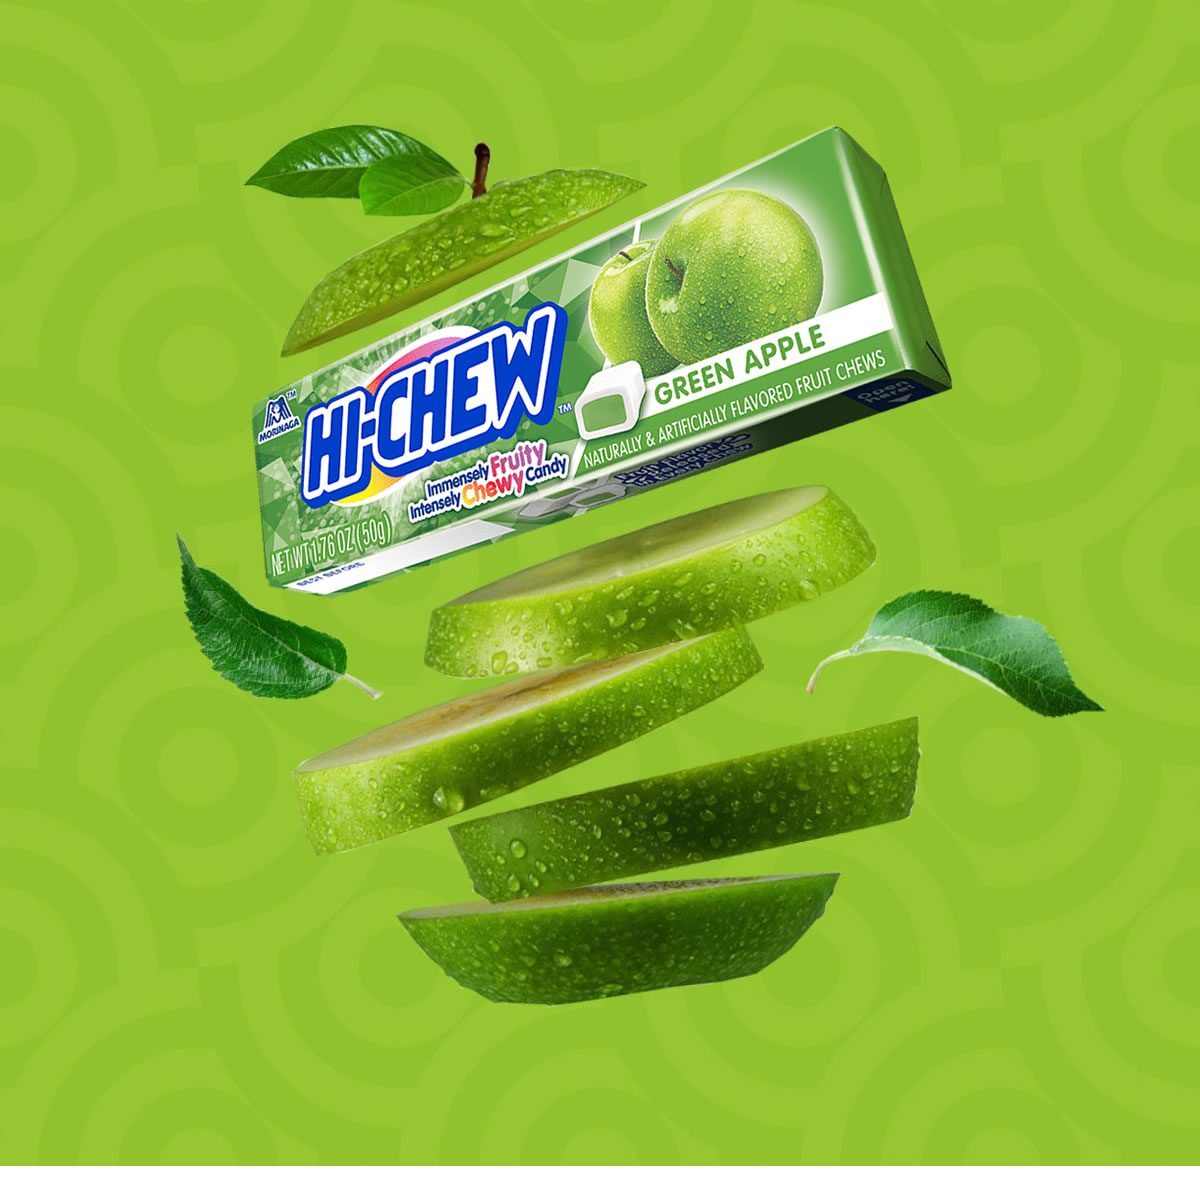 Green apple chewy candy